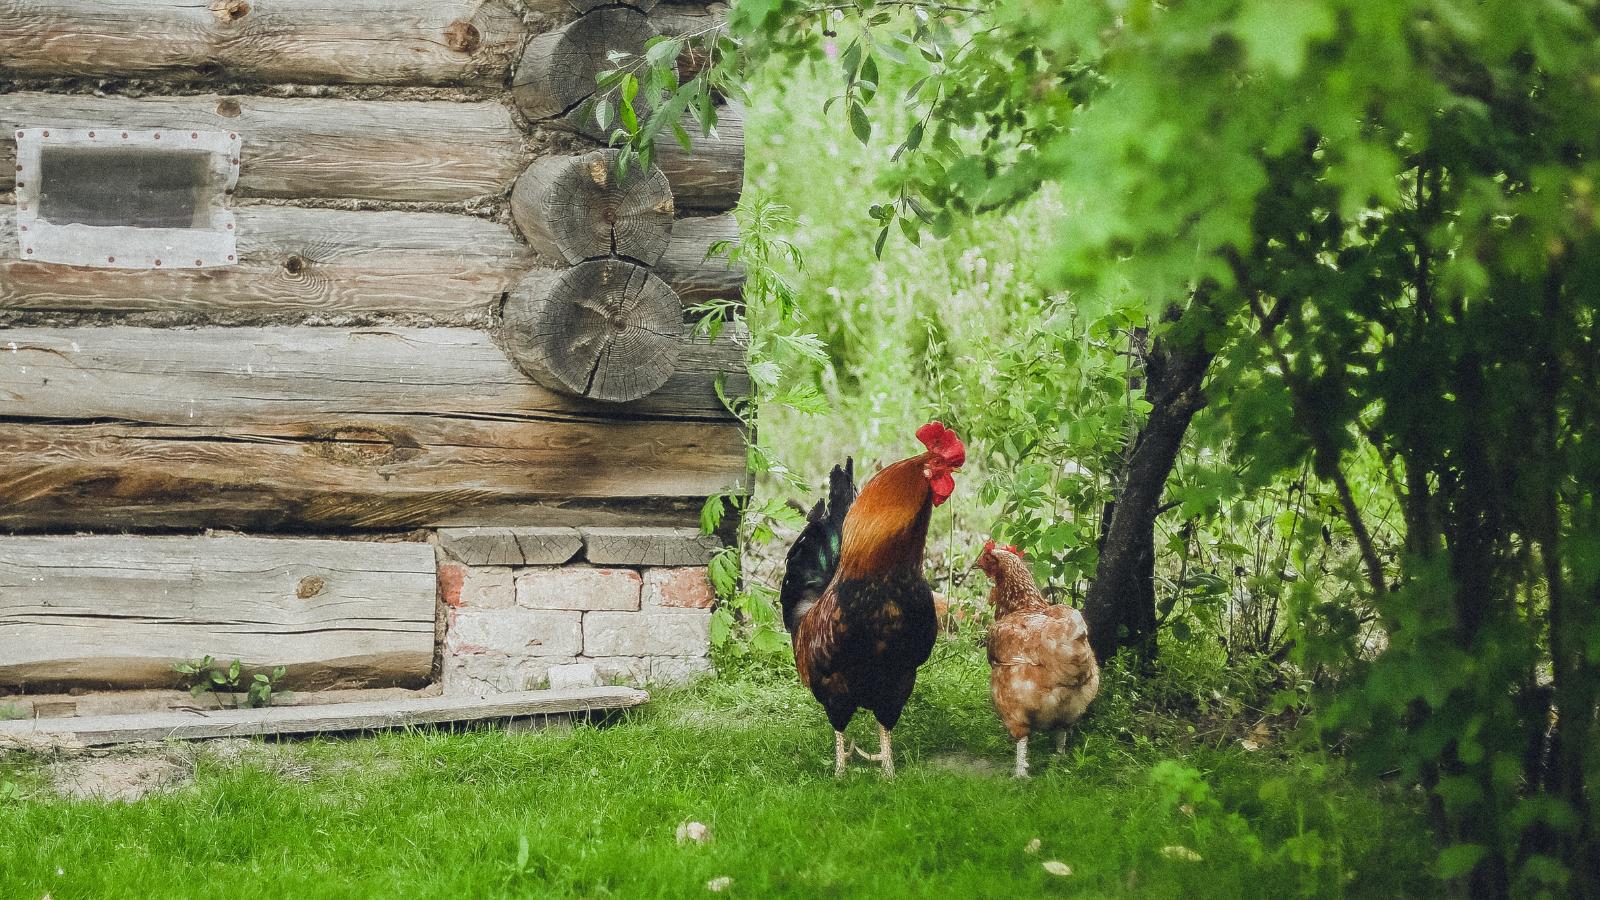 A rooster and hen on grass.